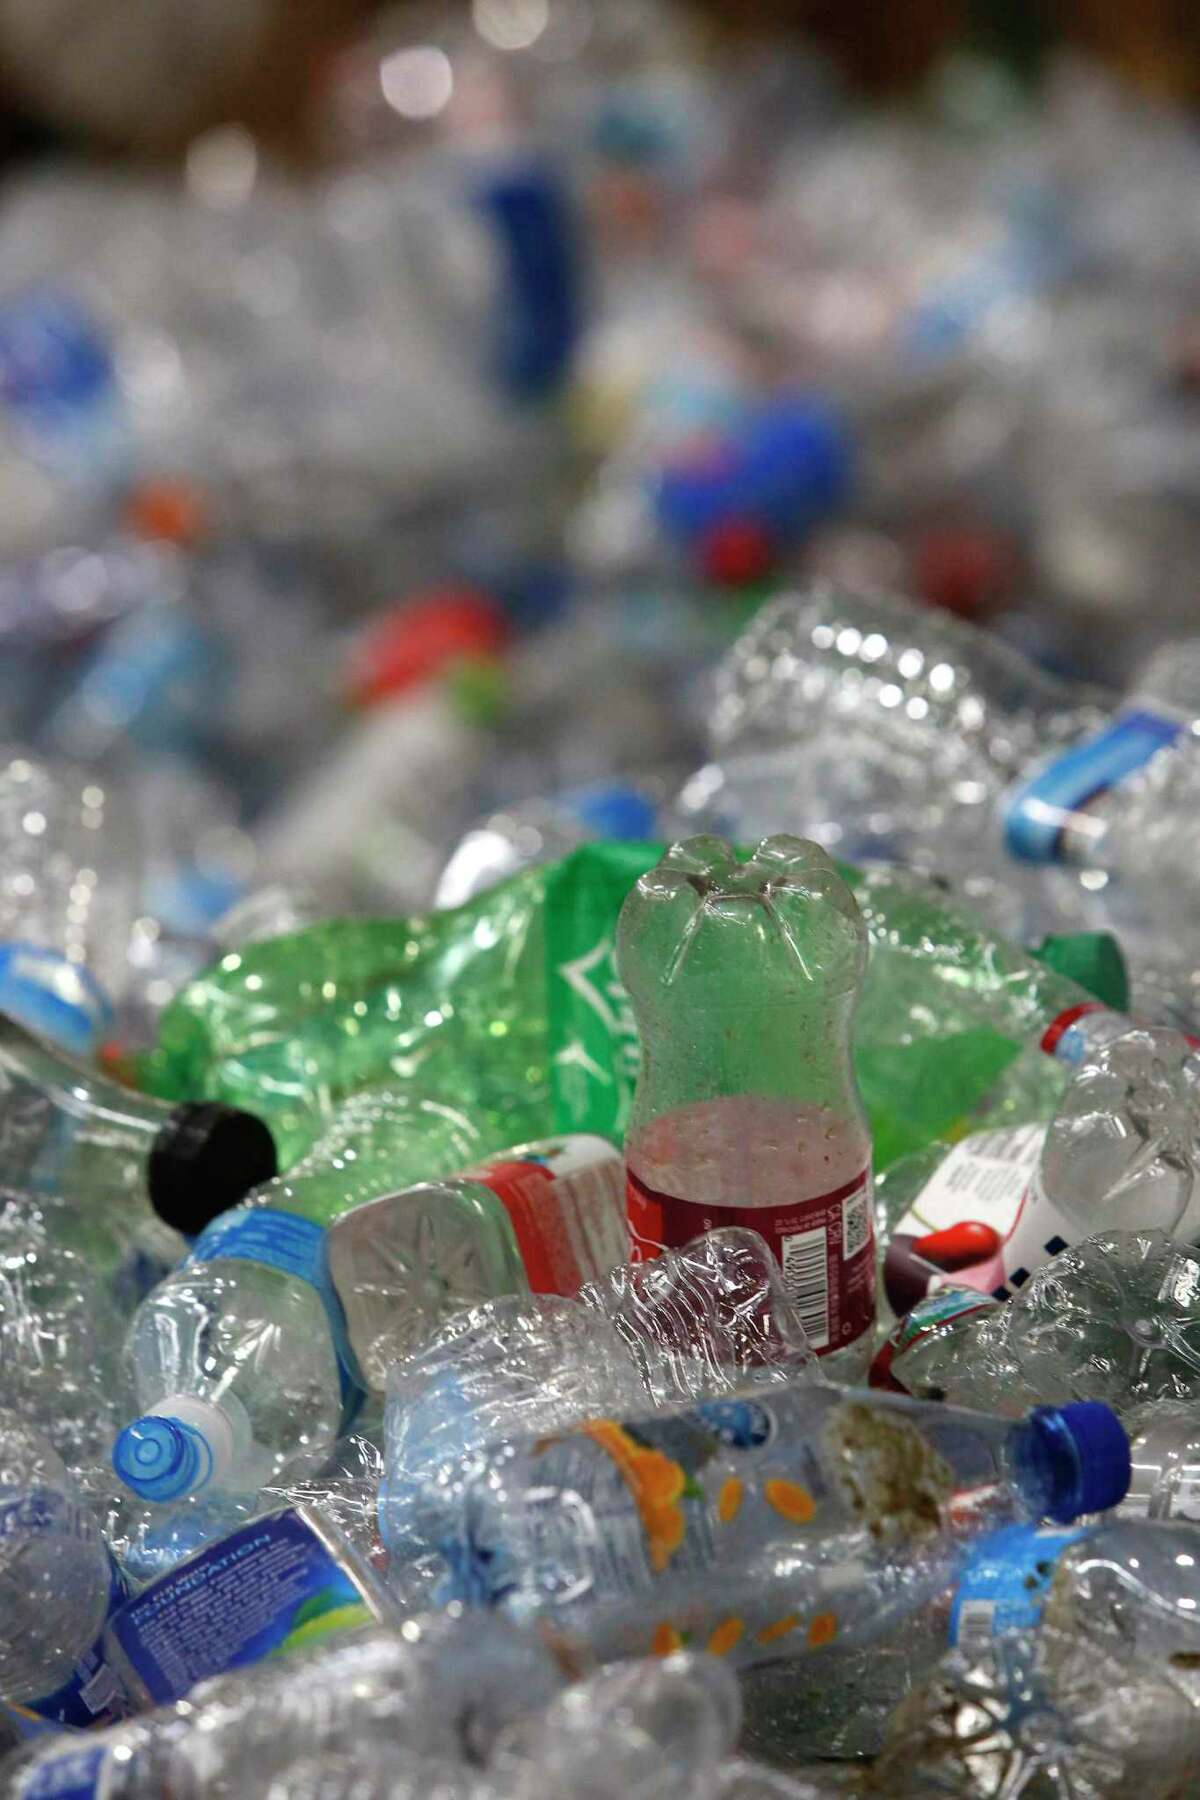 Plastic bottles are seen in piles before they are baled together at Recology's Recycle Central on Monday, September 30, 2019 in San Francisco, CA.